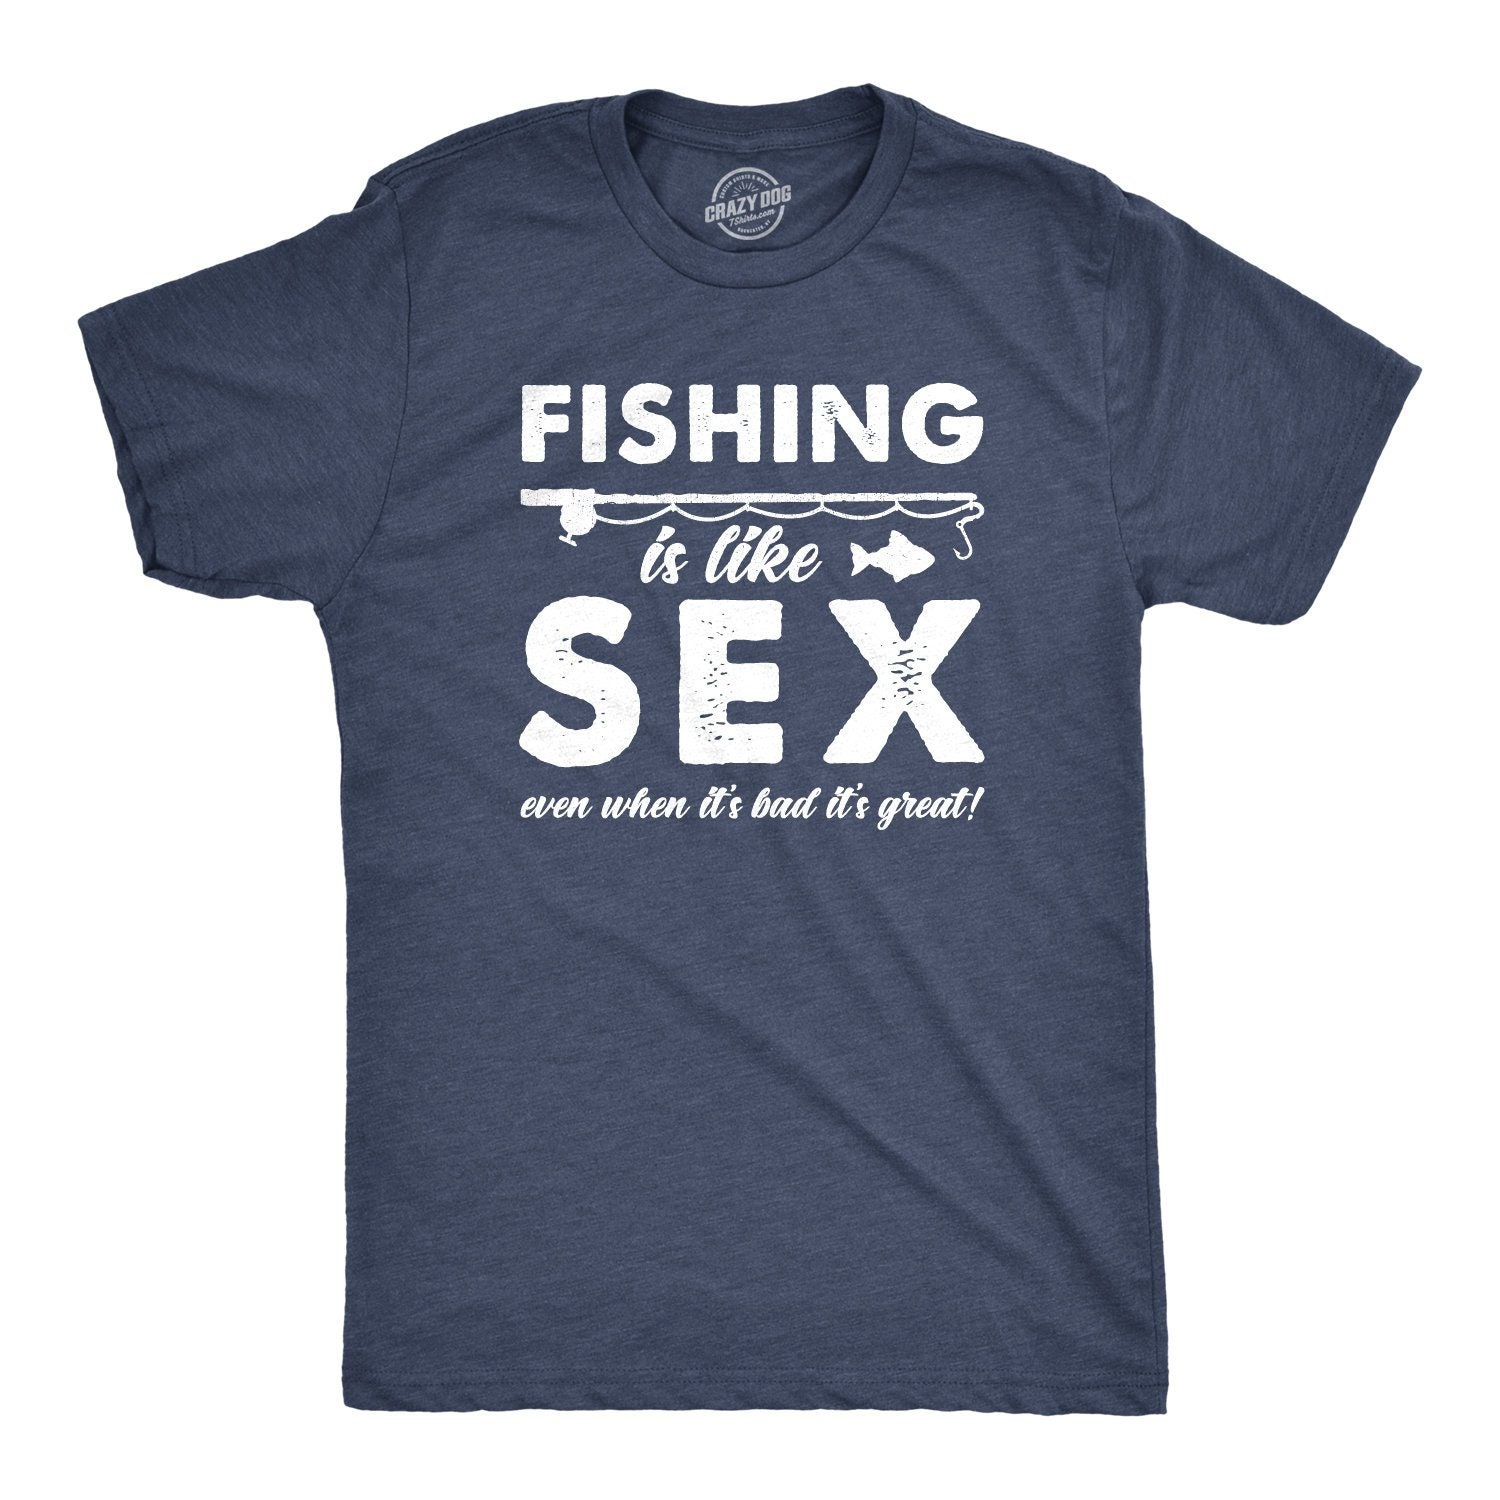 Sarcastic Fishing Sex T Shirt Men, Offensive Tshirt for Fisherman, Rude  Sassy Anglers Tees, Funny Mens Quotes Shirts, Guys Joke Quote Tops -   Canada